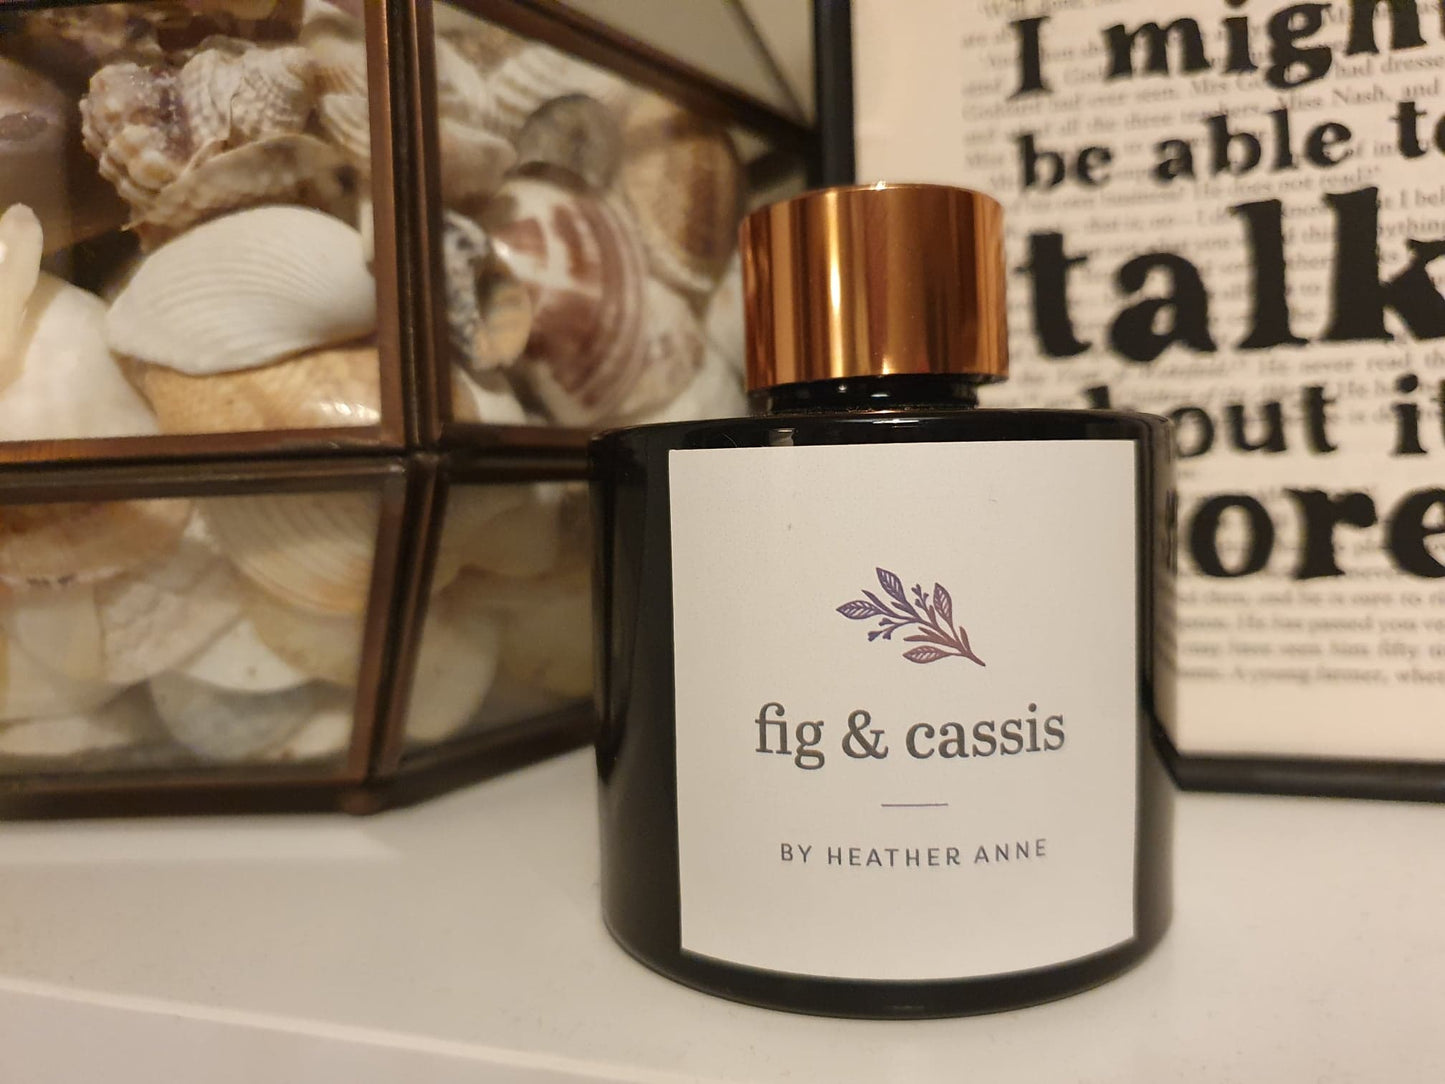 Fig & Cassis Reed Diffuser